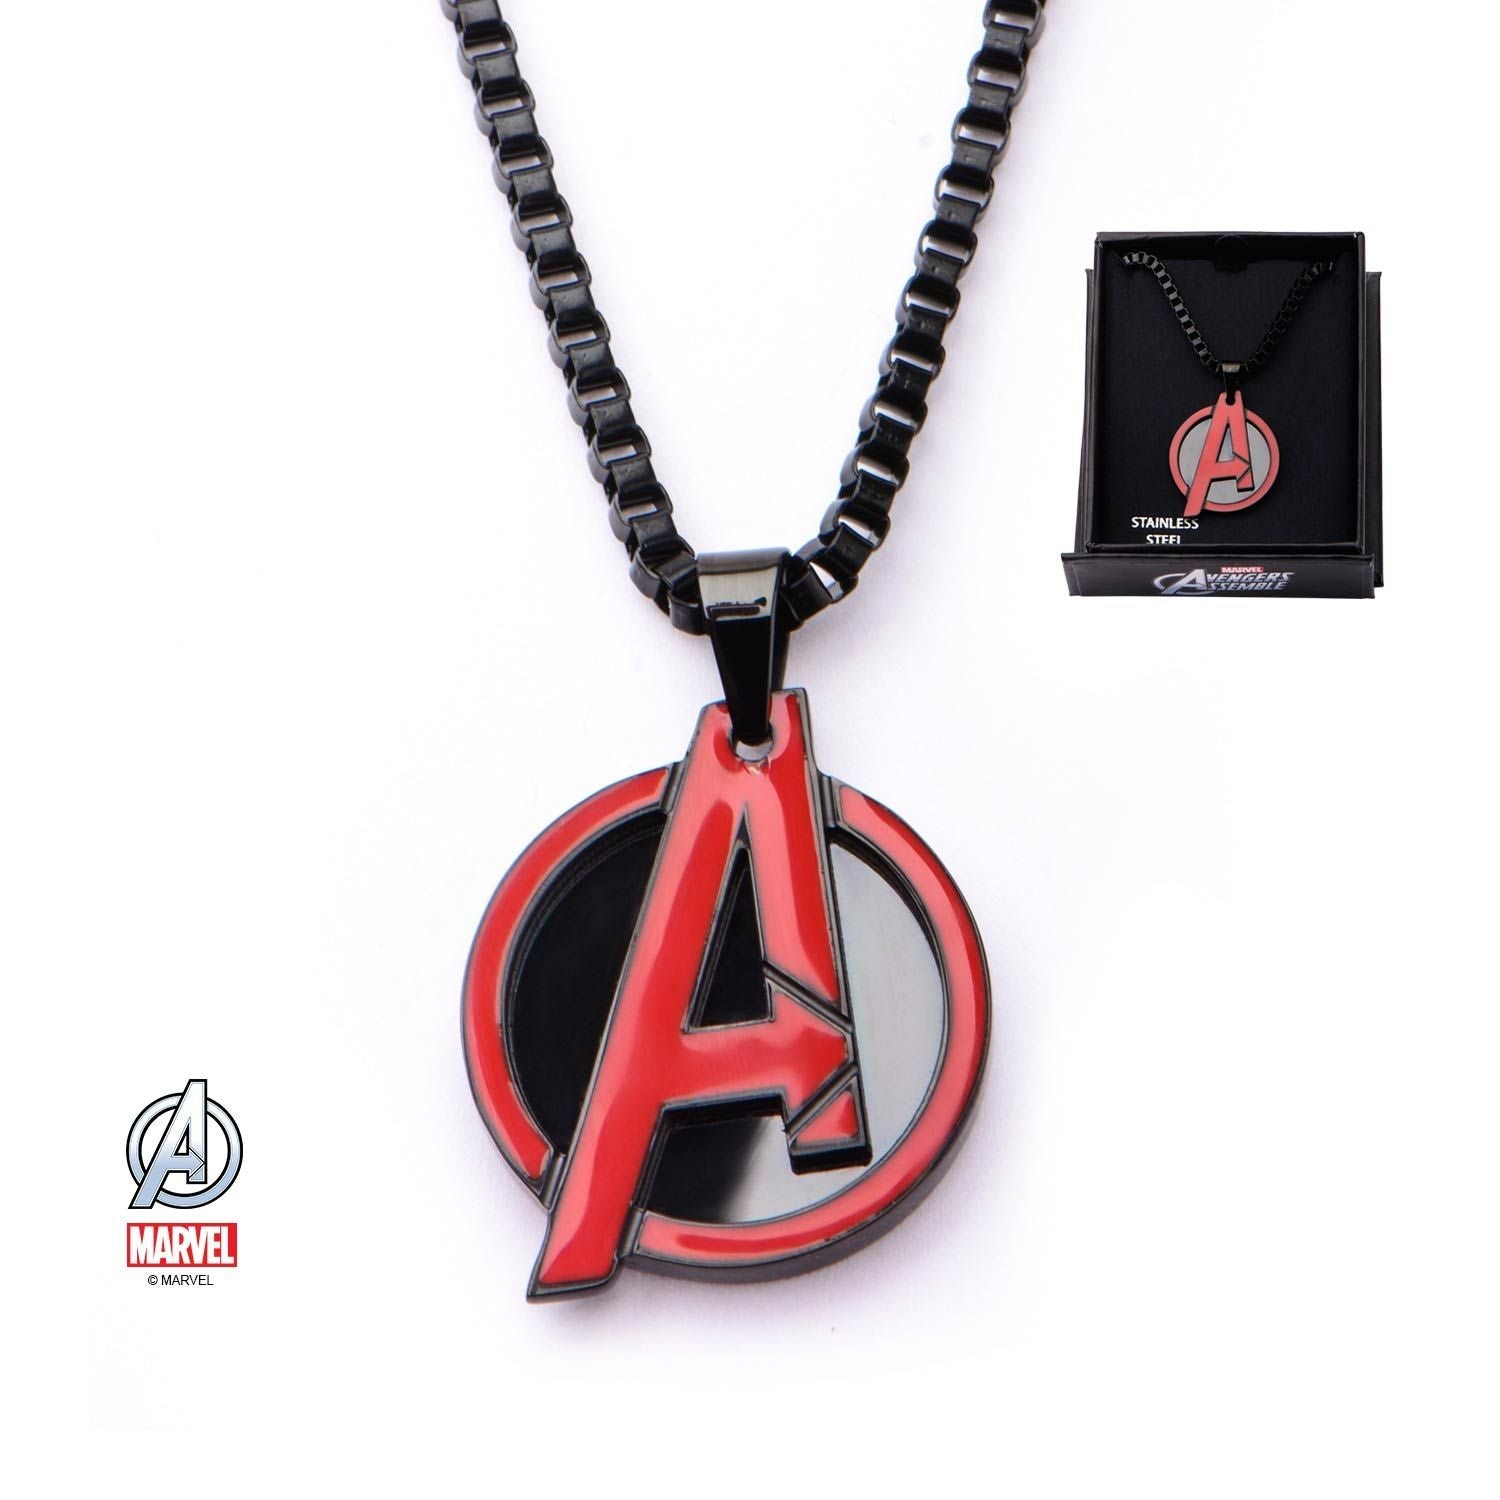 Marvel Men's Stainless Steel Black Ion Plated with Red Avengers Logo Pendant, 24 inch Chain